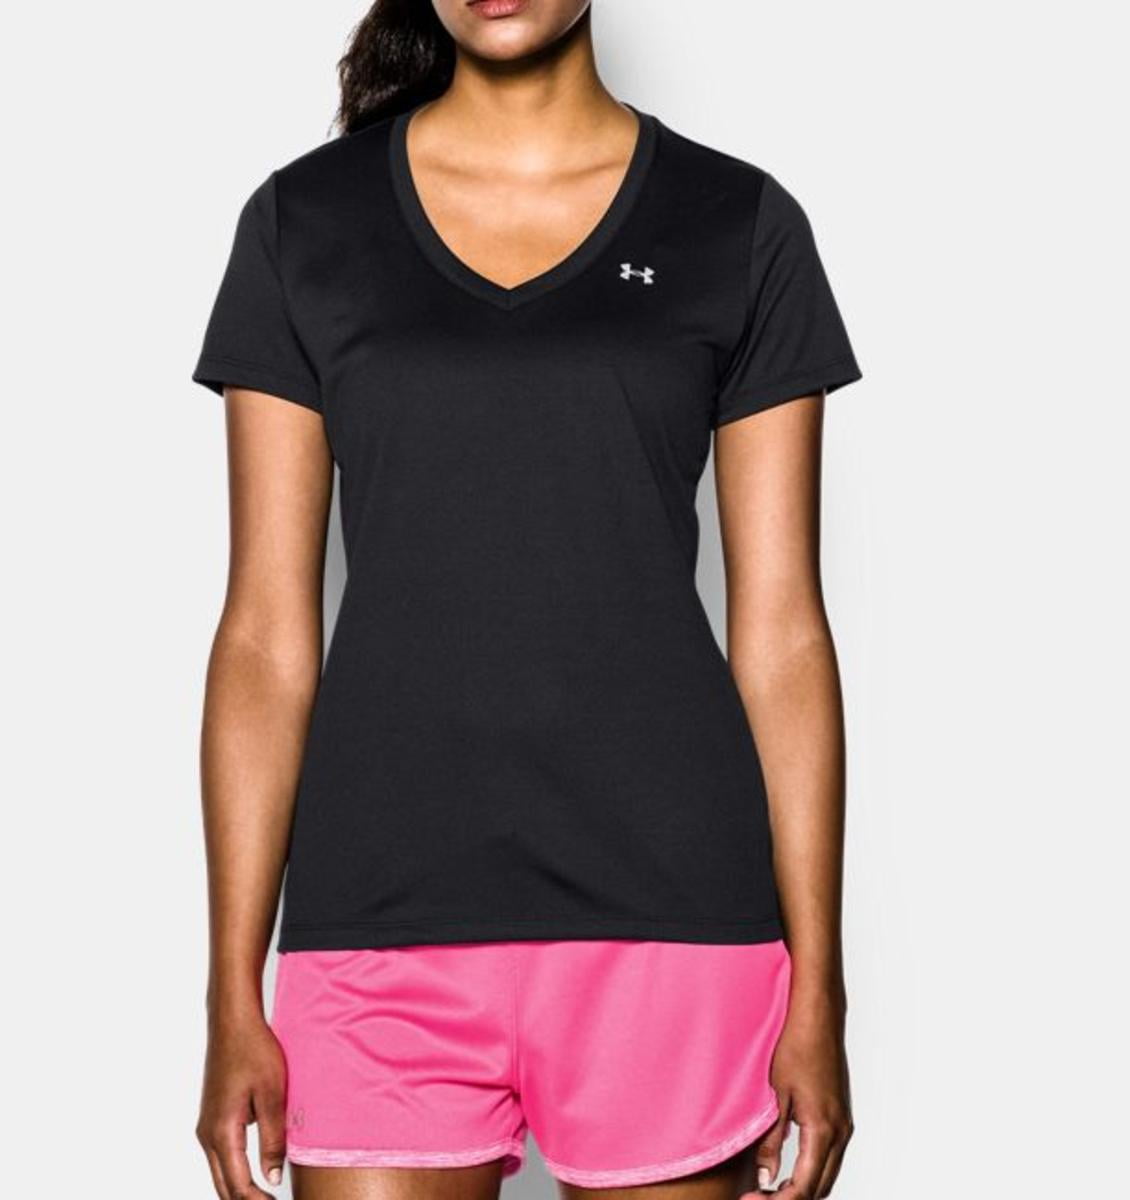 Under Armour Heat Gear Semi Fitted T-shirt V-neck